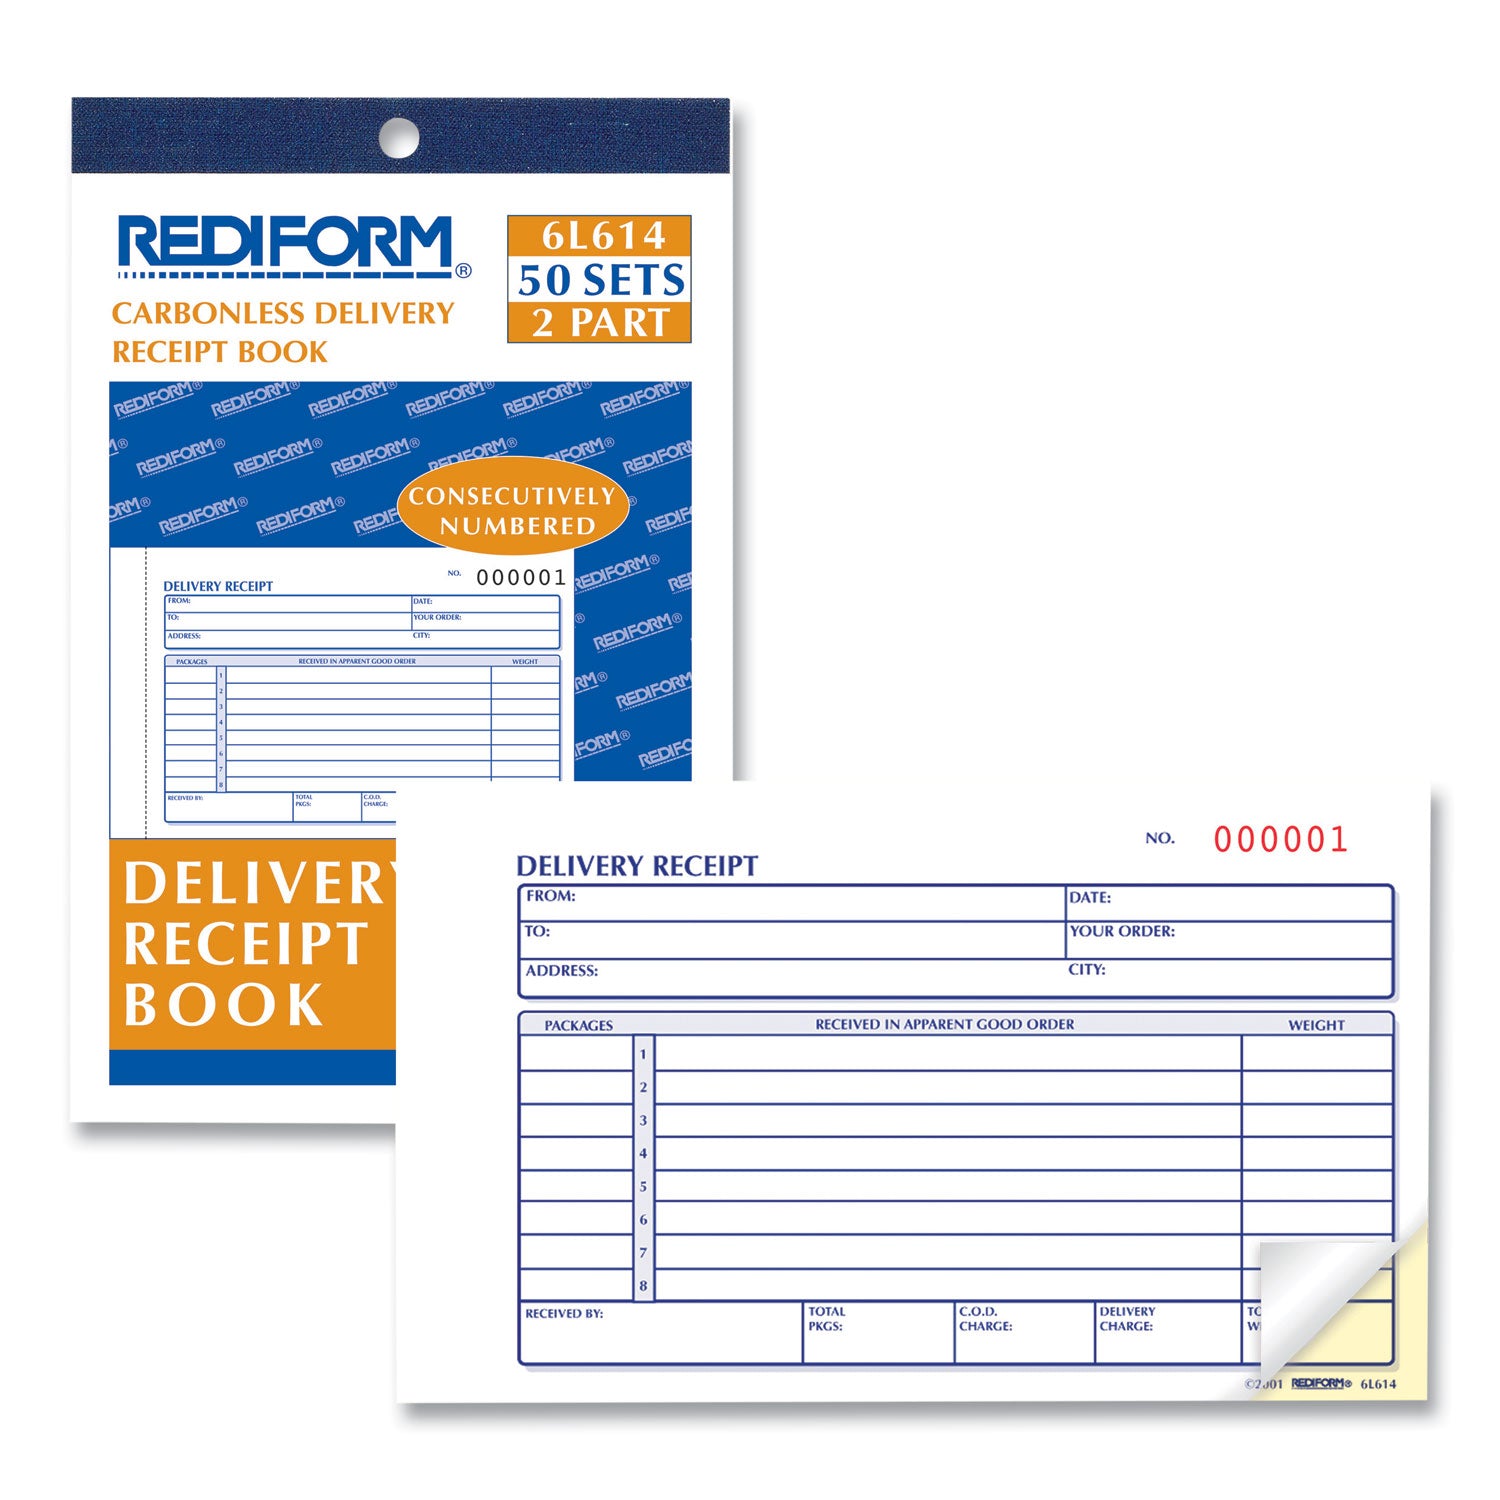 Delivery Receipt Book, Three-Part Carbonless, 6.38 x 4.25, 50 Forms Total - 